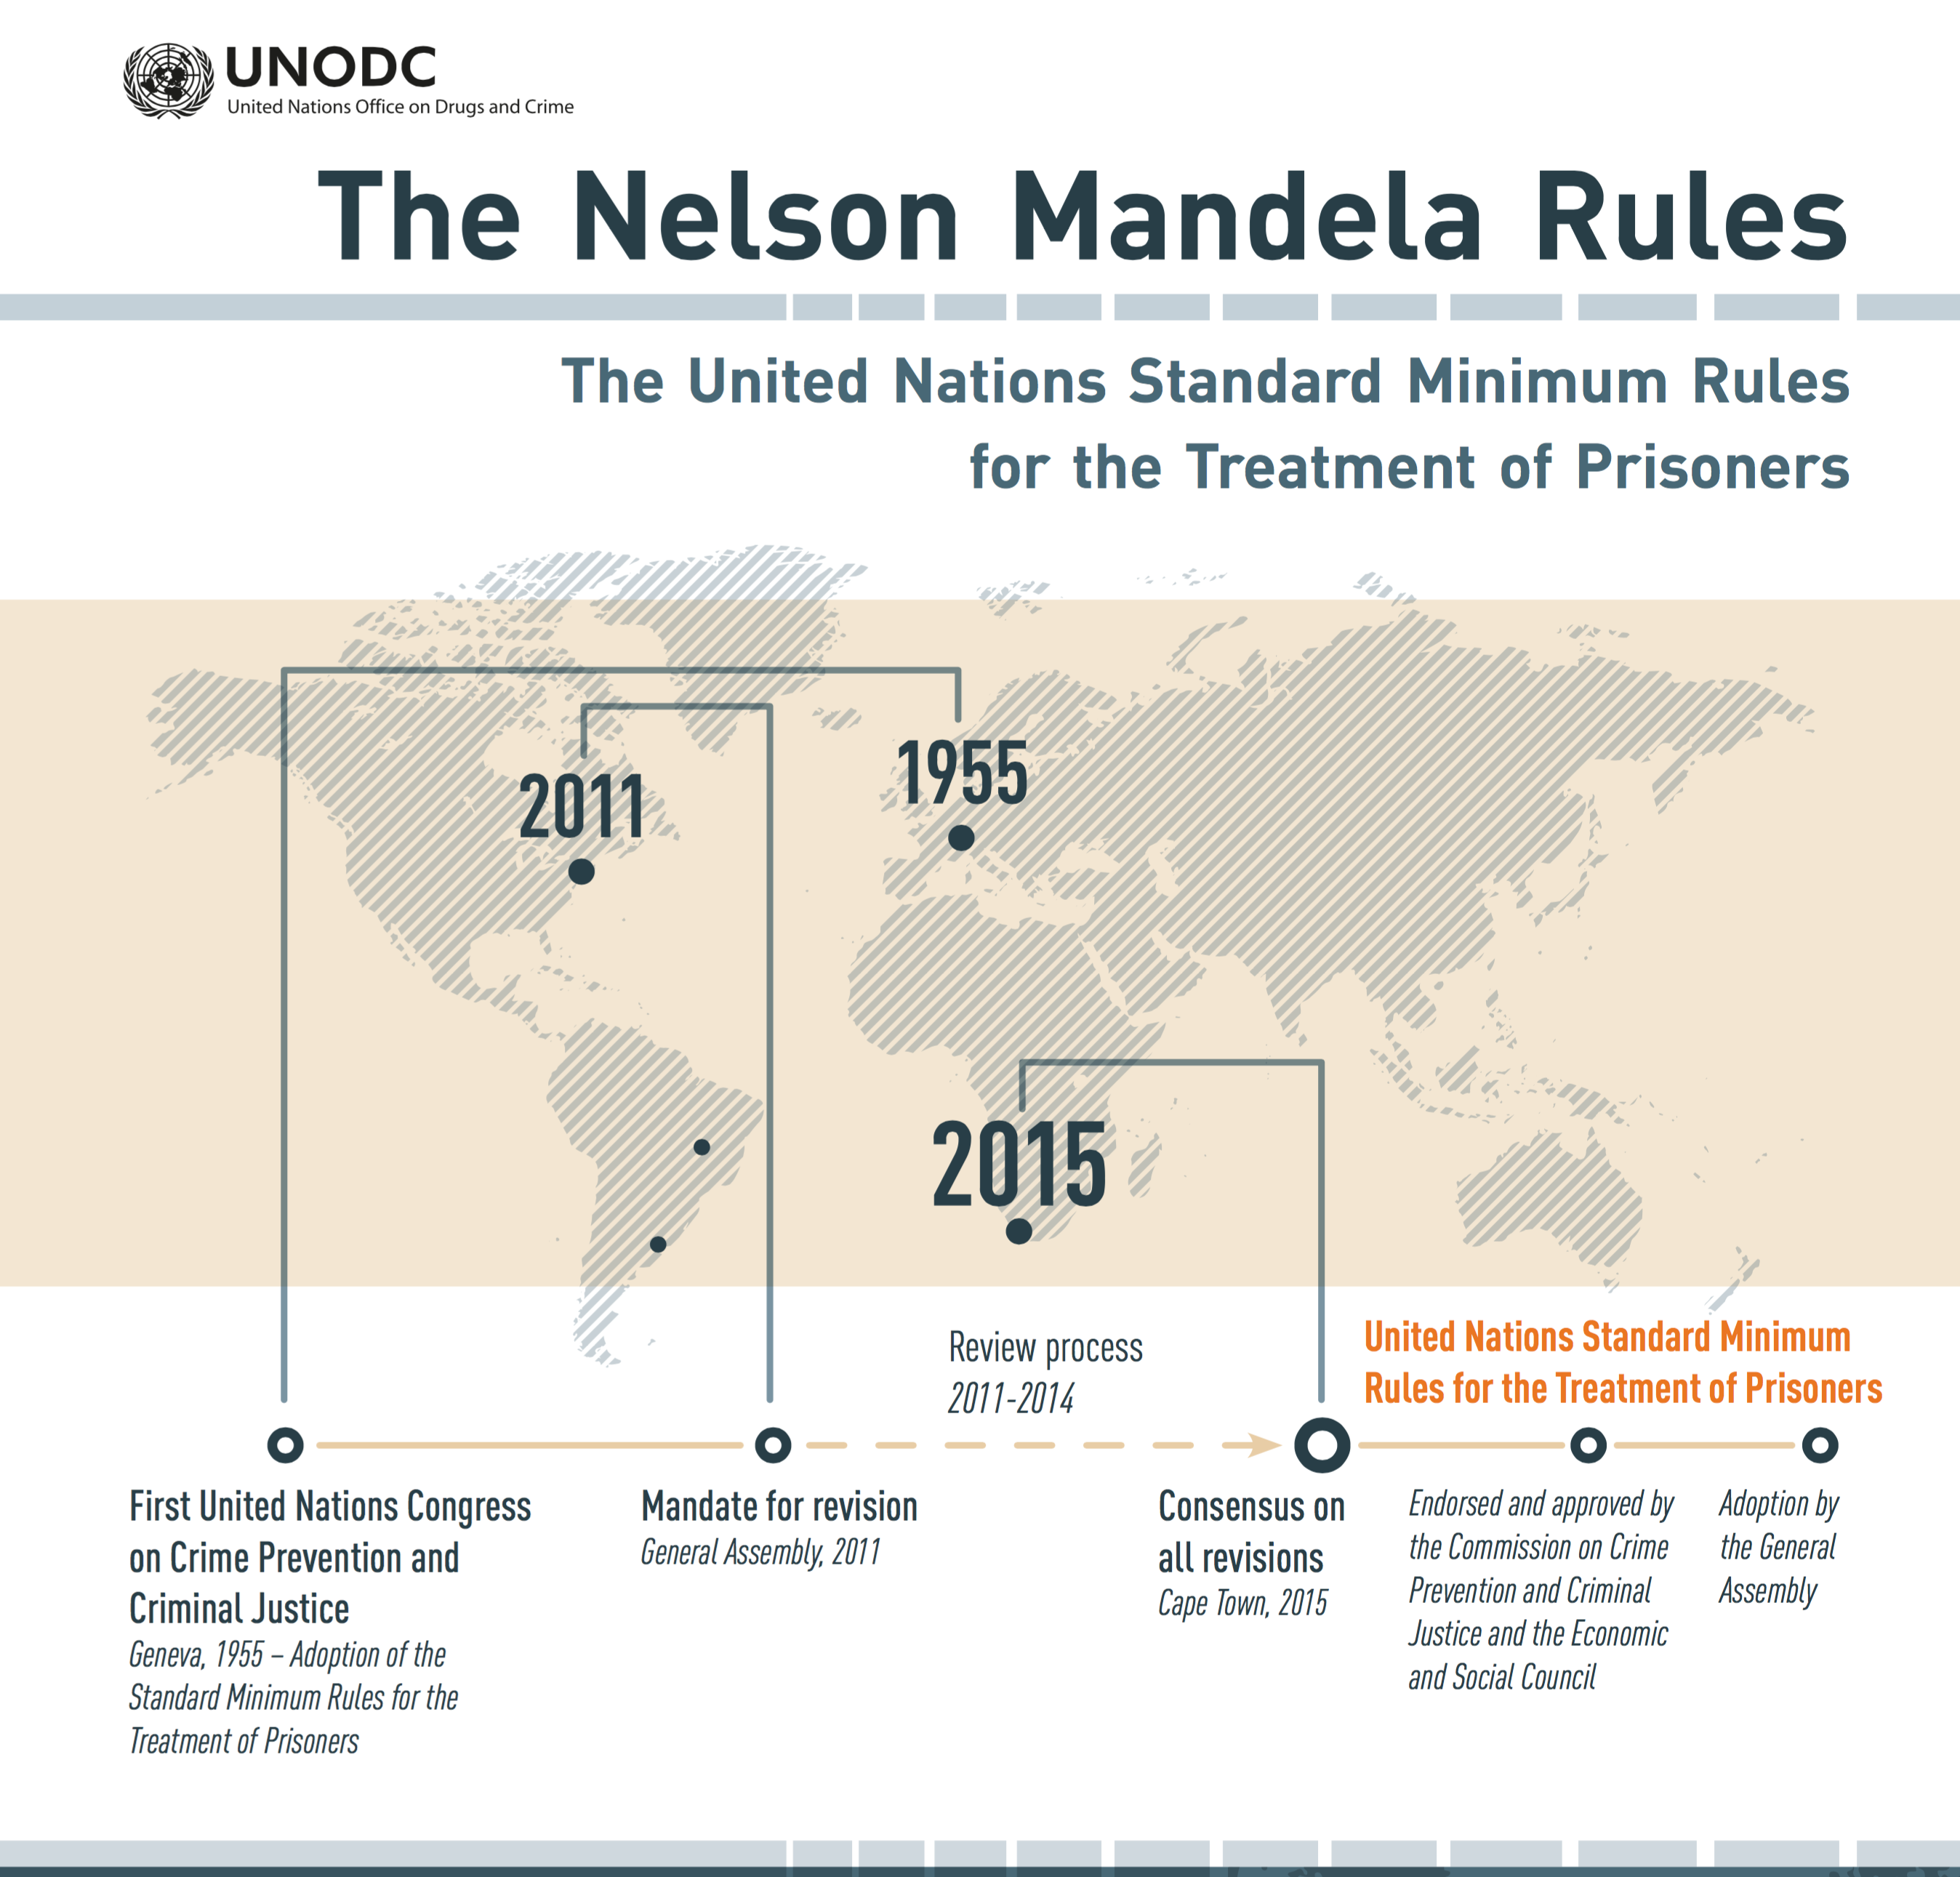 A screen shot of the PDF 'The Nelson Mandela Rules - Infographic' produced by UNODC